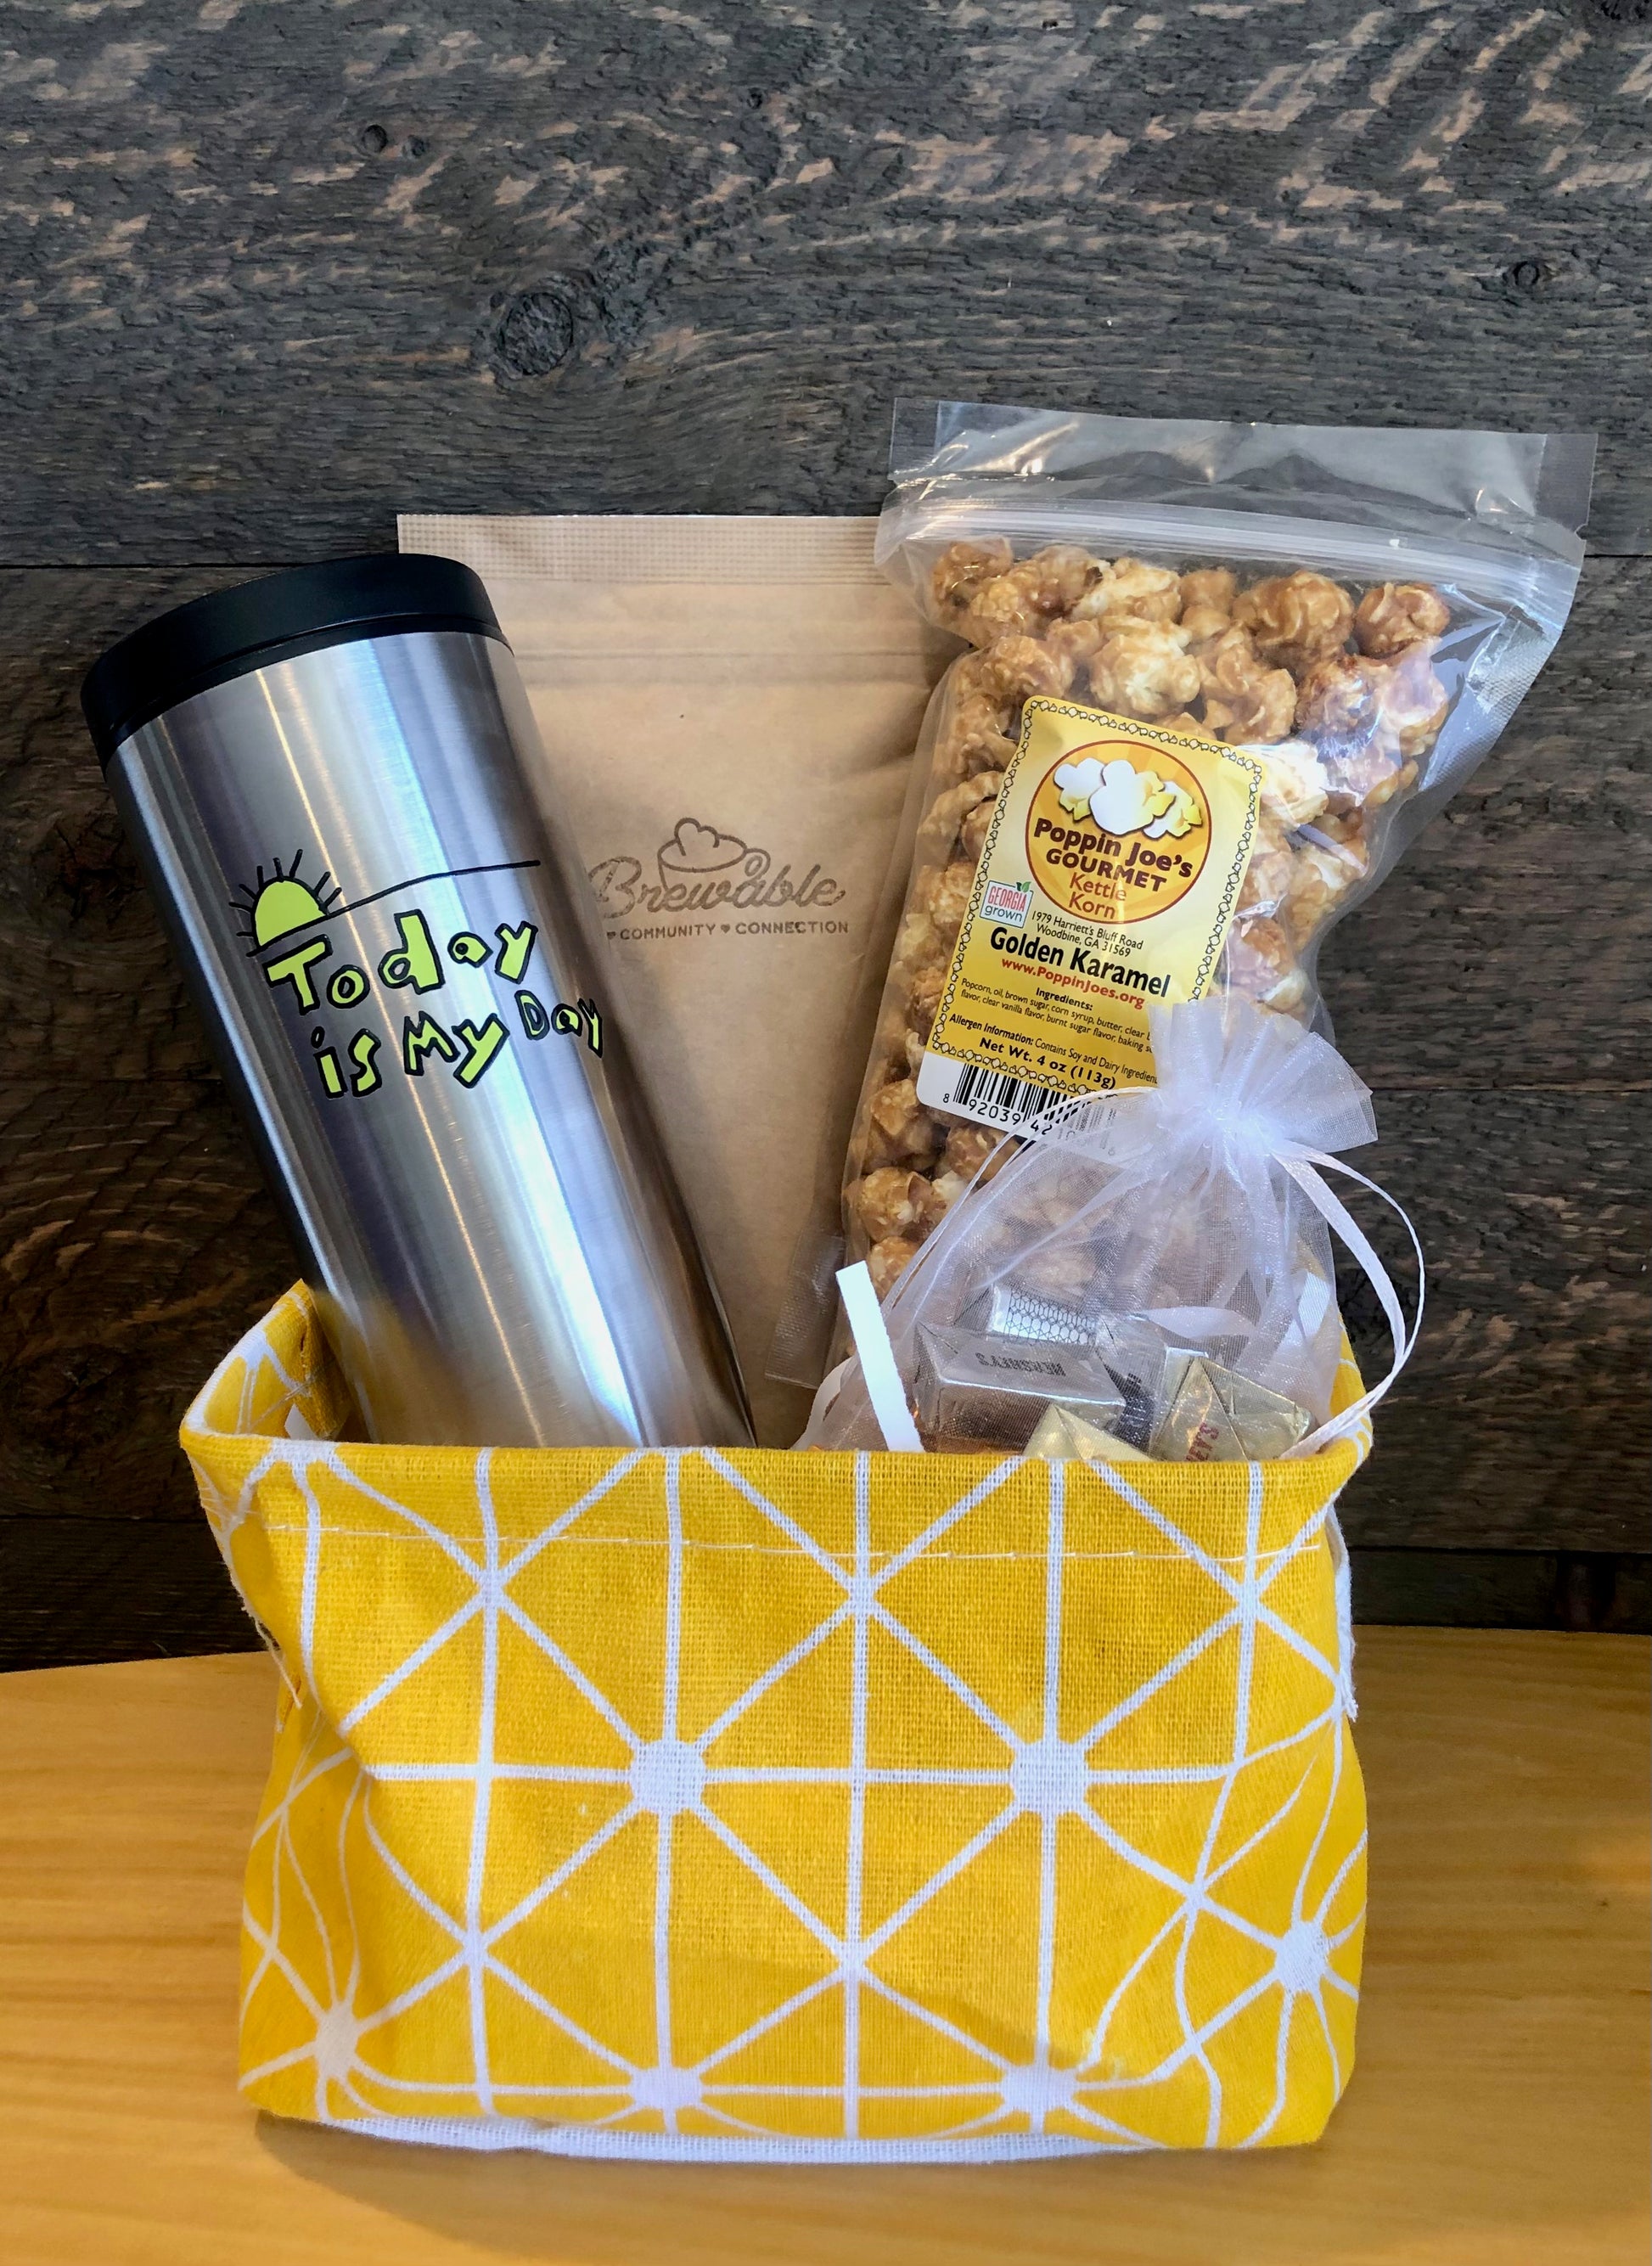 This handmade gift basket includes a choice of a ceramic mug or a stainless steel tumbler, gourmet coffee or hot cocoa mix, caramel popcorn and chocolates 